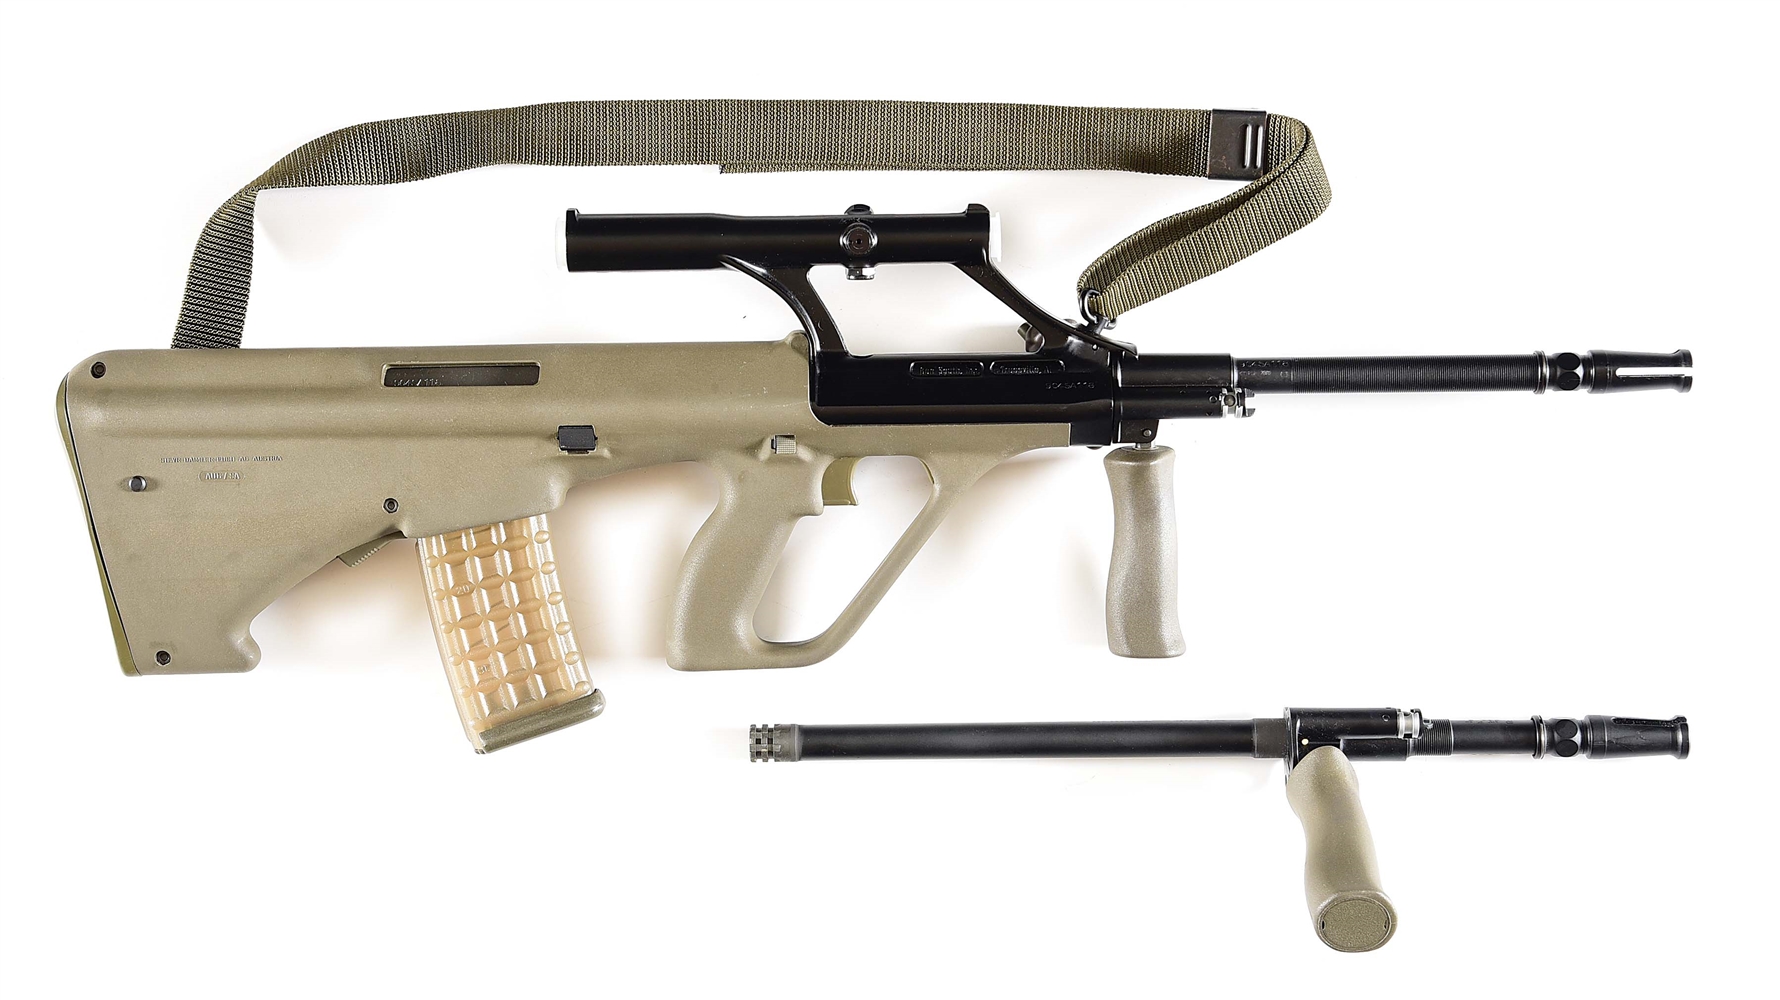 (M) DESIRABLE PRE-BAN STEYR AUG/SA SEMI-AUTOMATIC RIFLE WITH EXTRA BARREL & SPARE MAGAZINES.